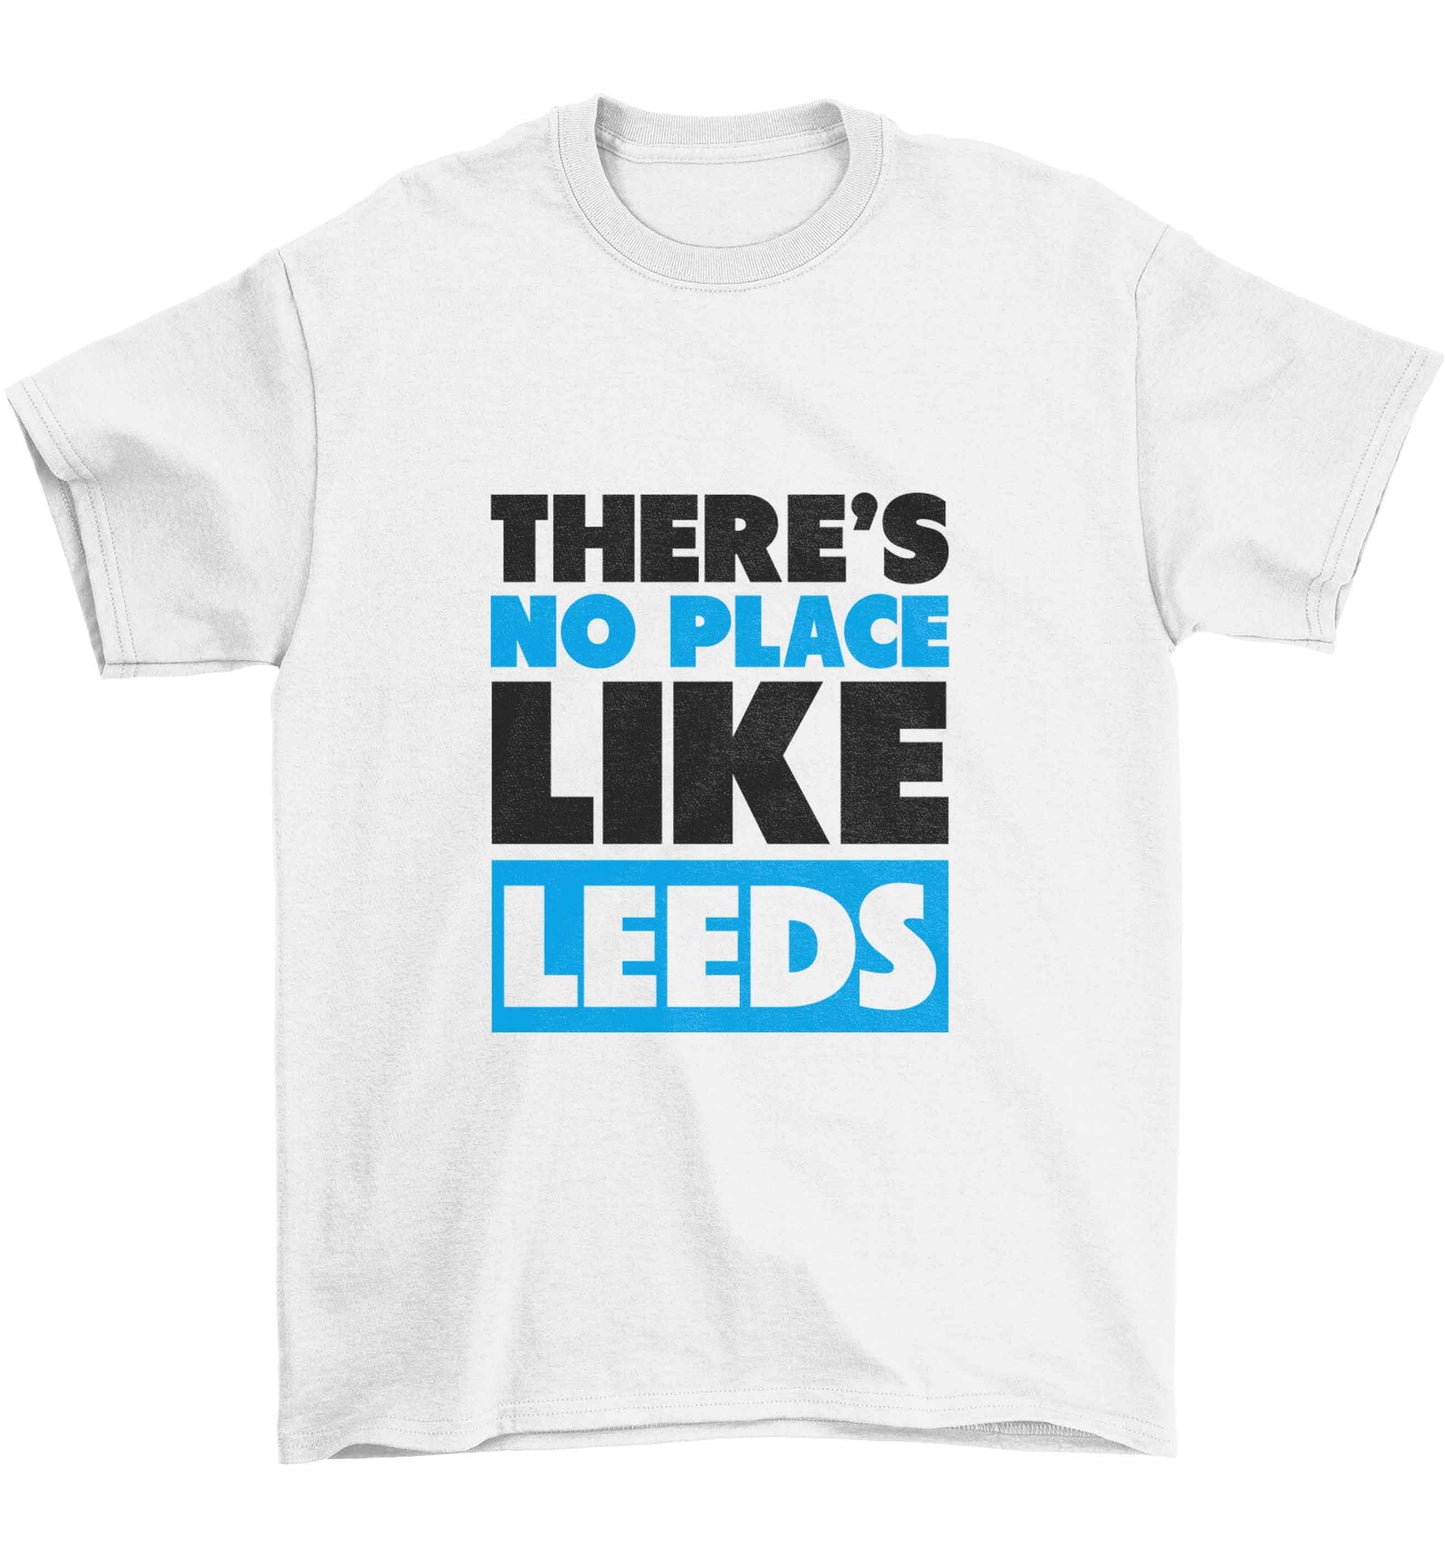 There's no place like Leeds Children's white Tshirt 12-13 Years